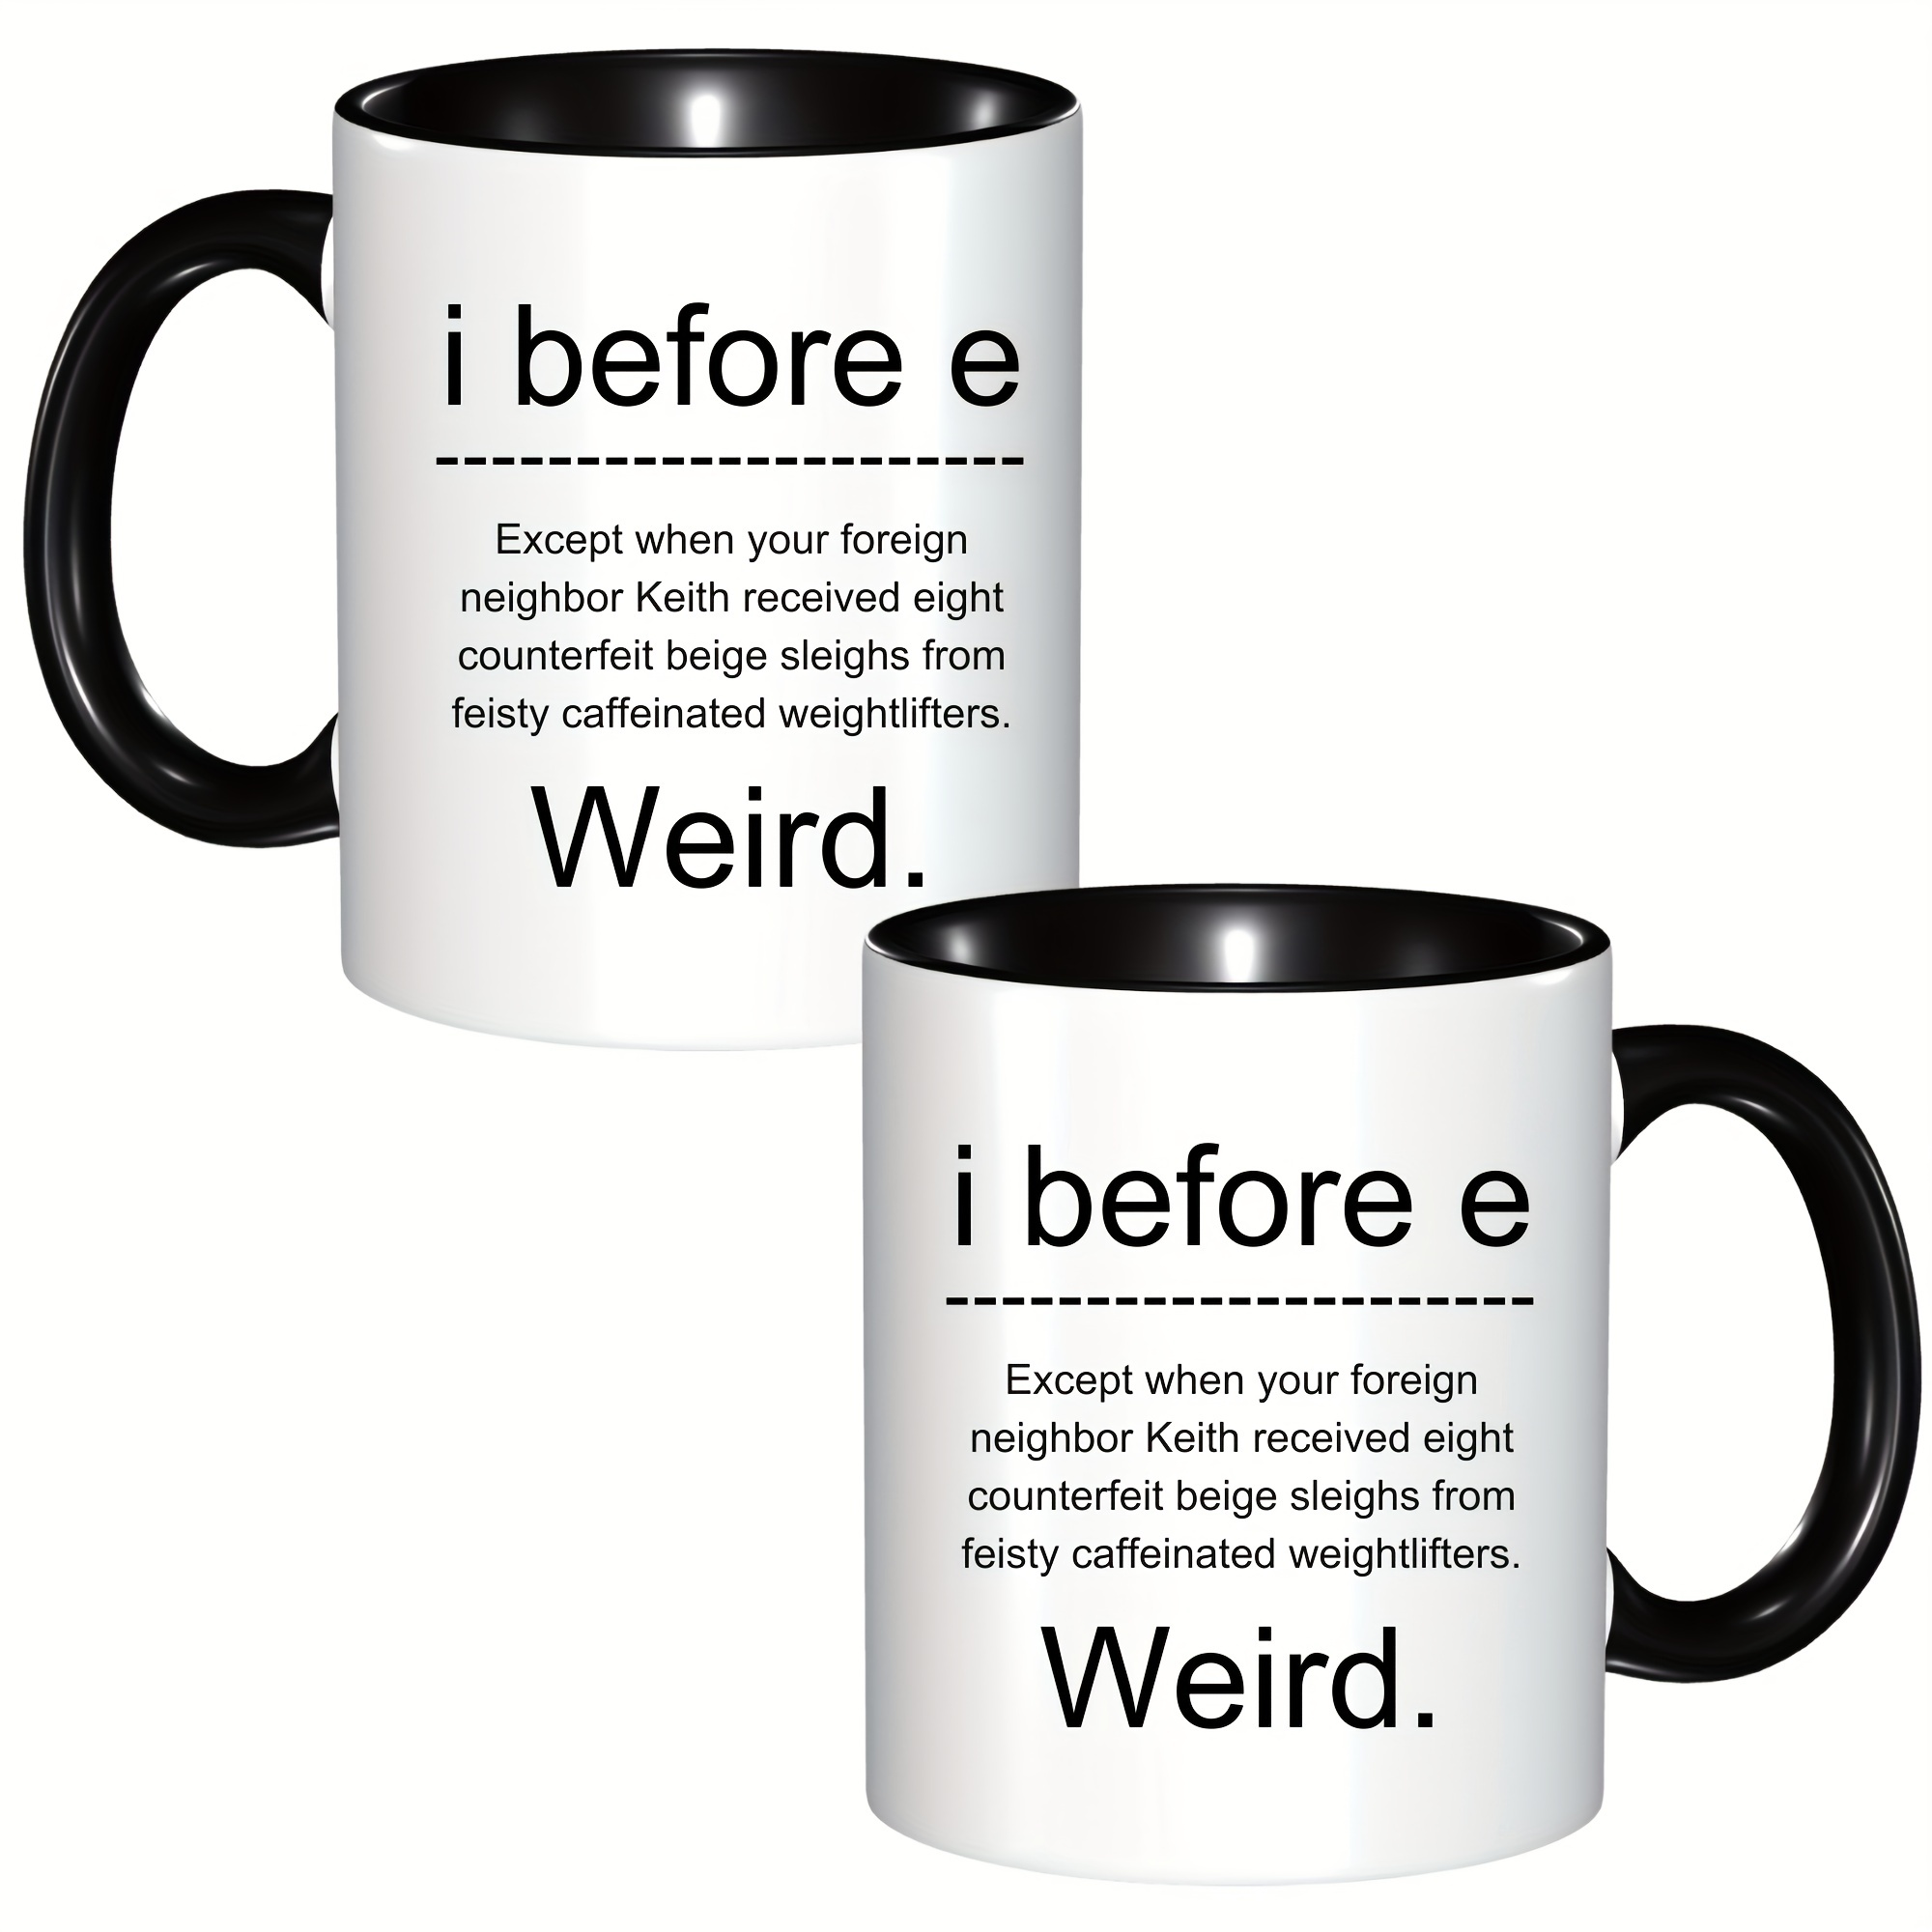 Of Course I Talk to Myself - 11oz and 15oz Funny Coffee Mugs - The Best  Funny Gift for Friends and Colleagues - Coffee Mugs and Cups with Sayings  by 